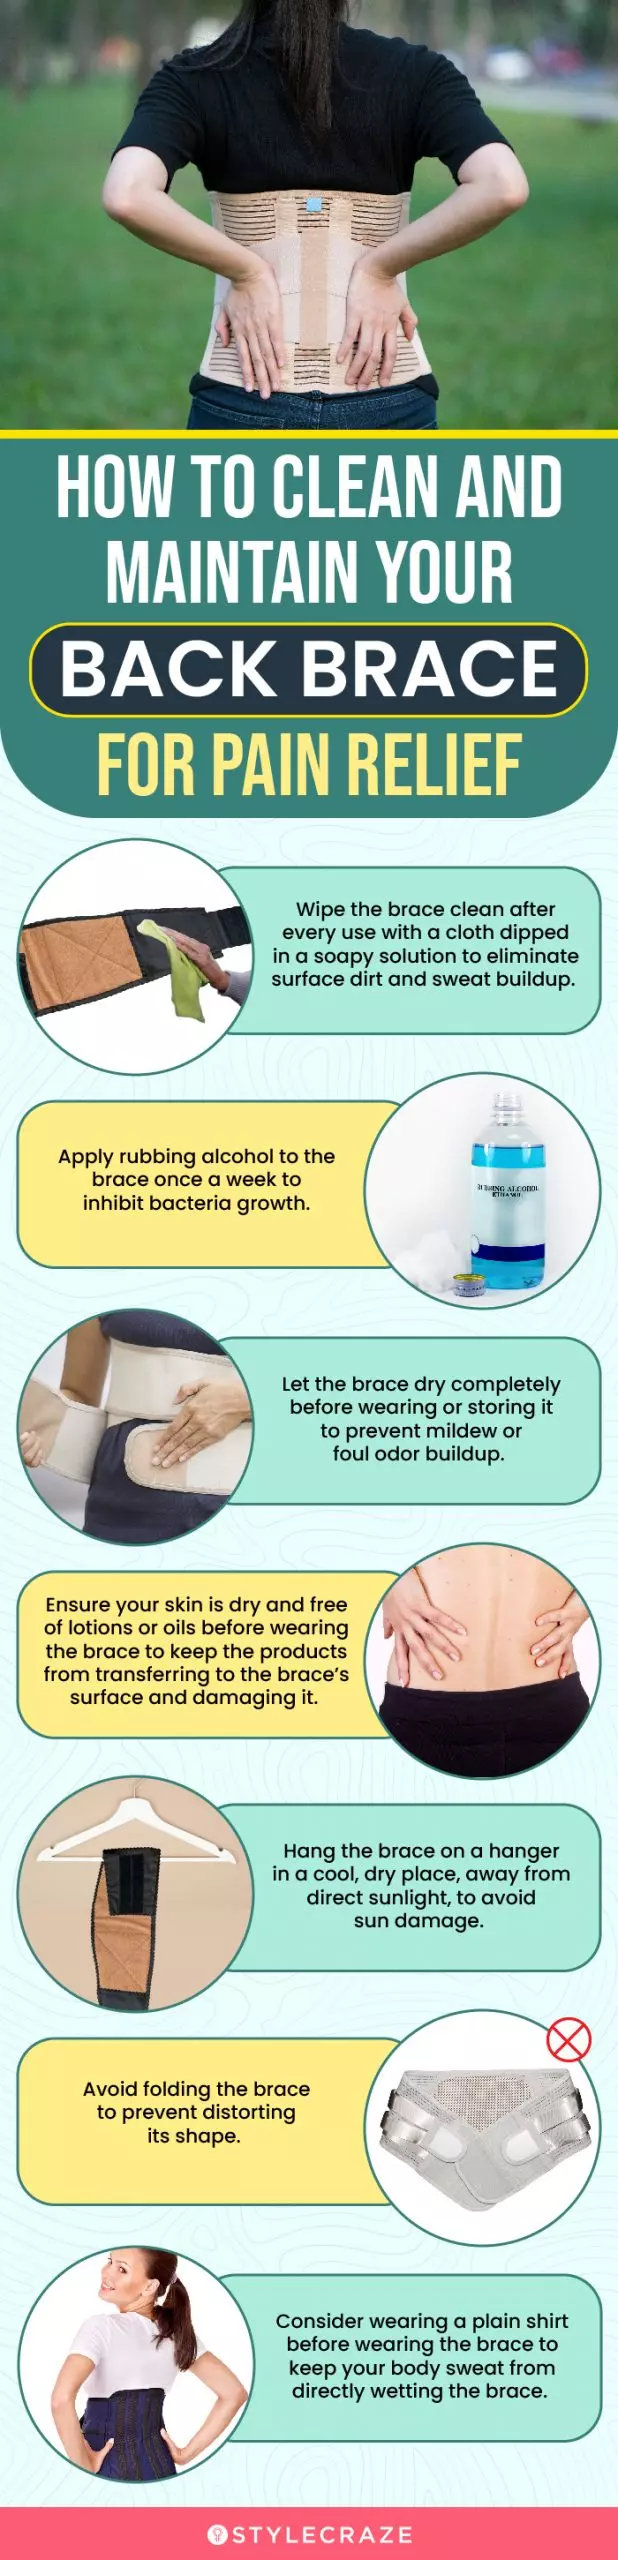 How To Clean And Maintain Your Back Brace For Pain Relief (infographic)